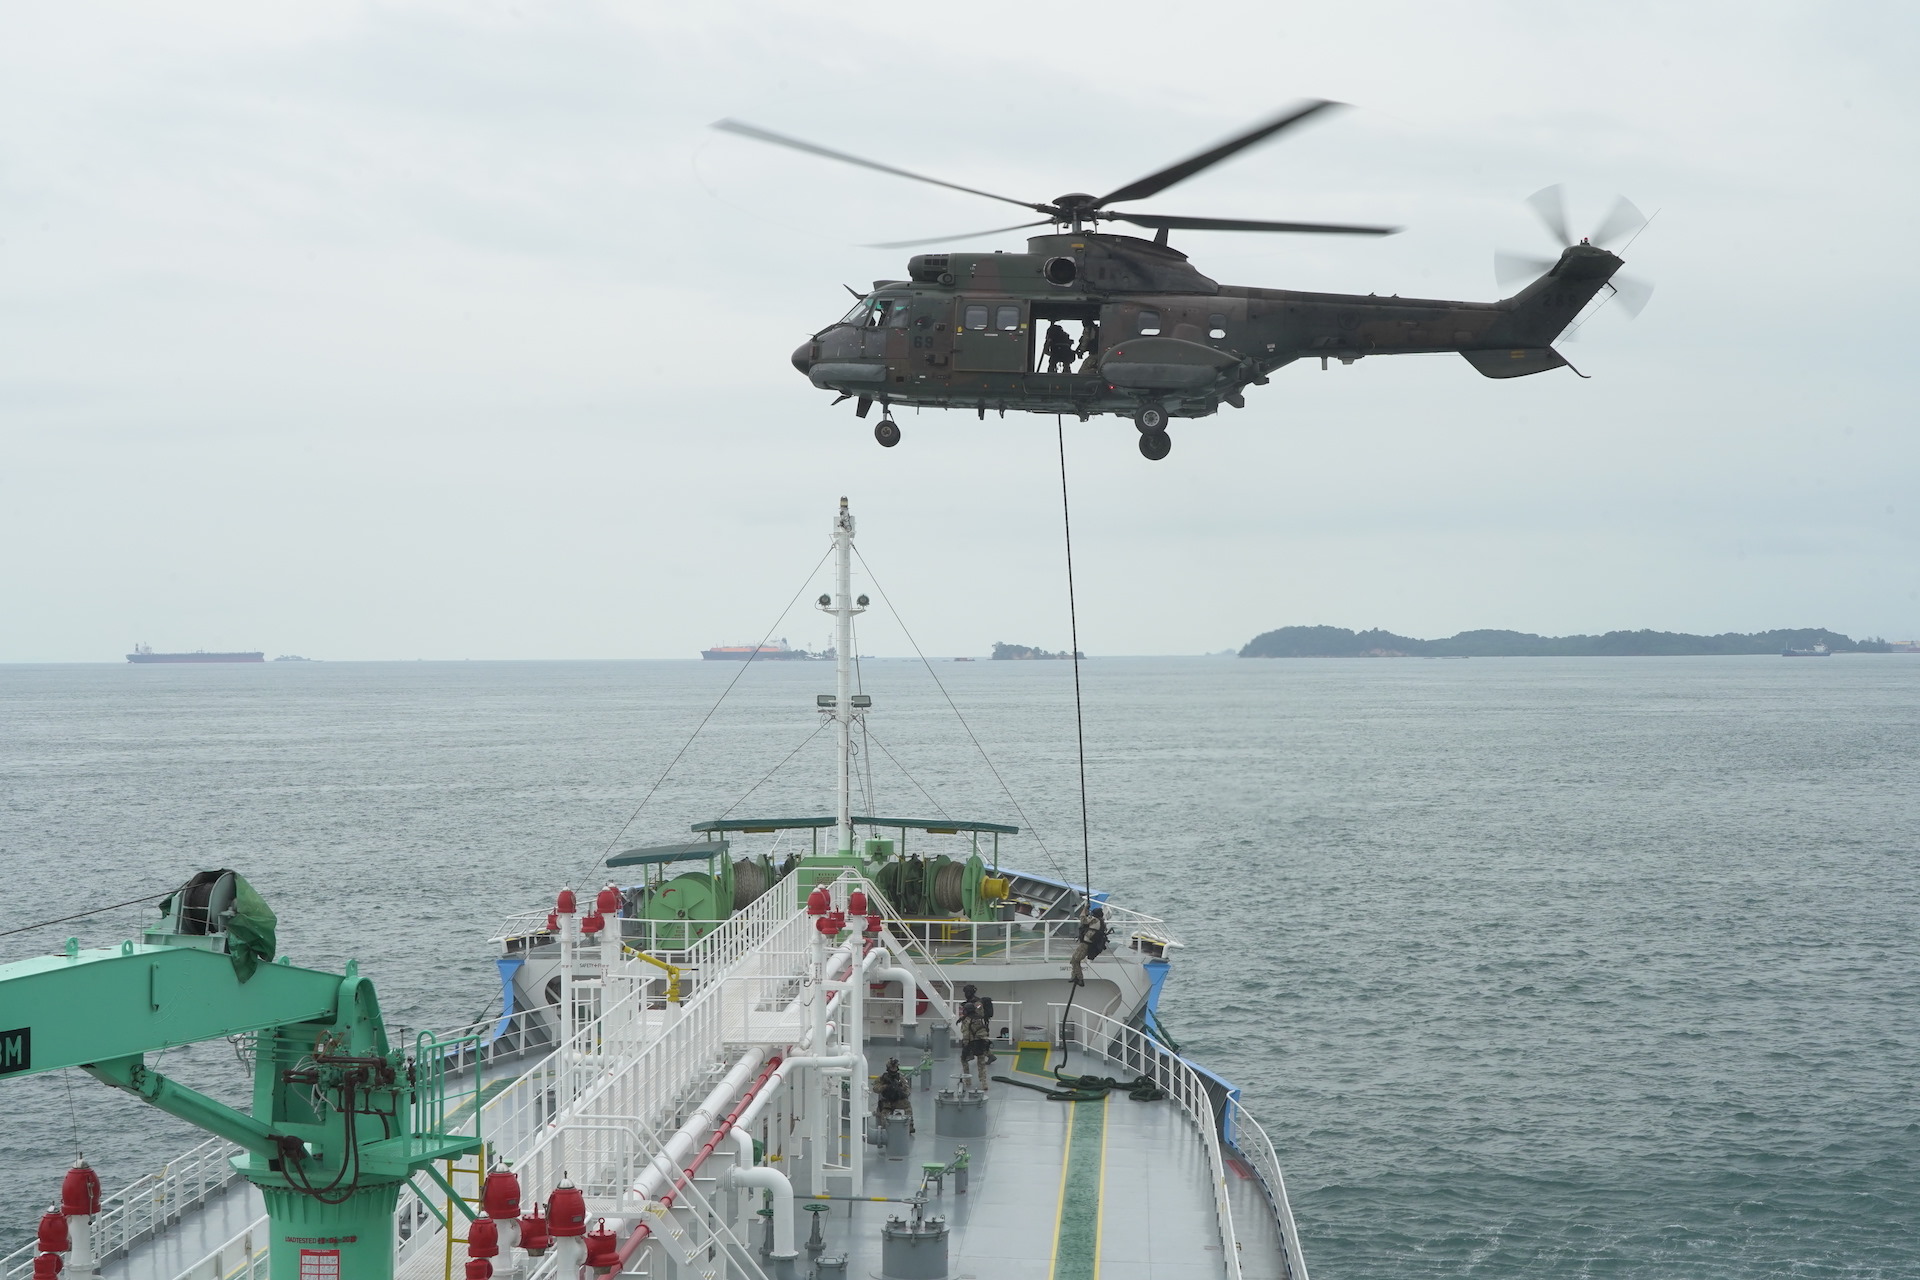 Maritime exercises test national agencies' response against security threats